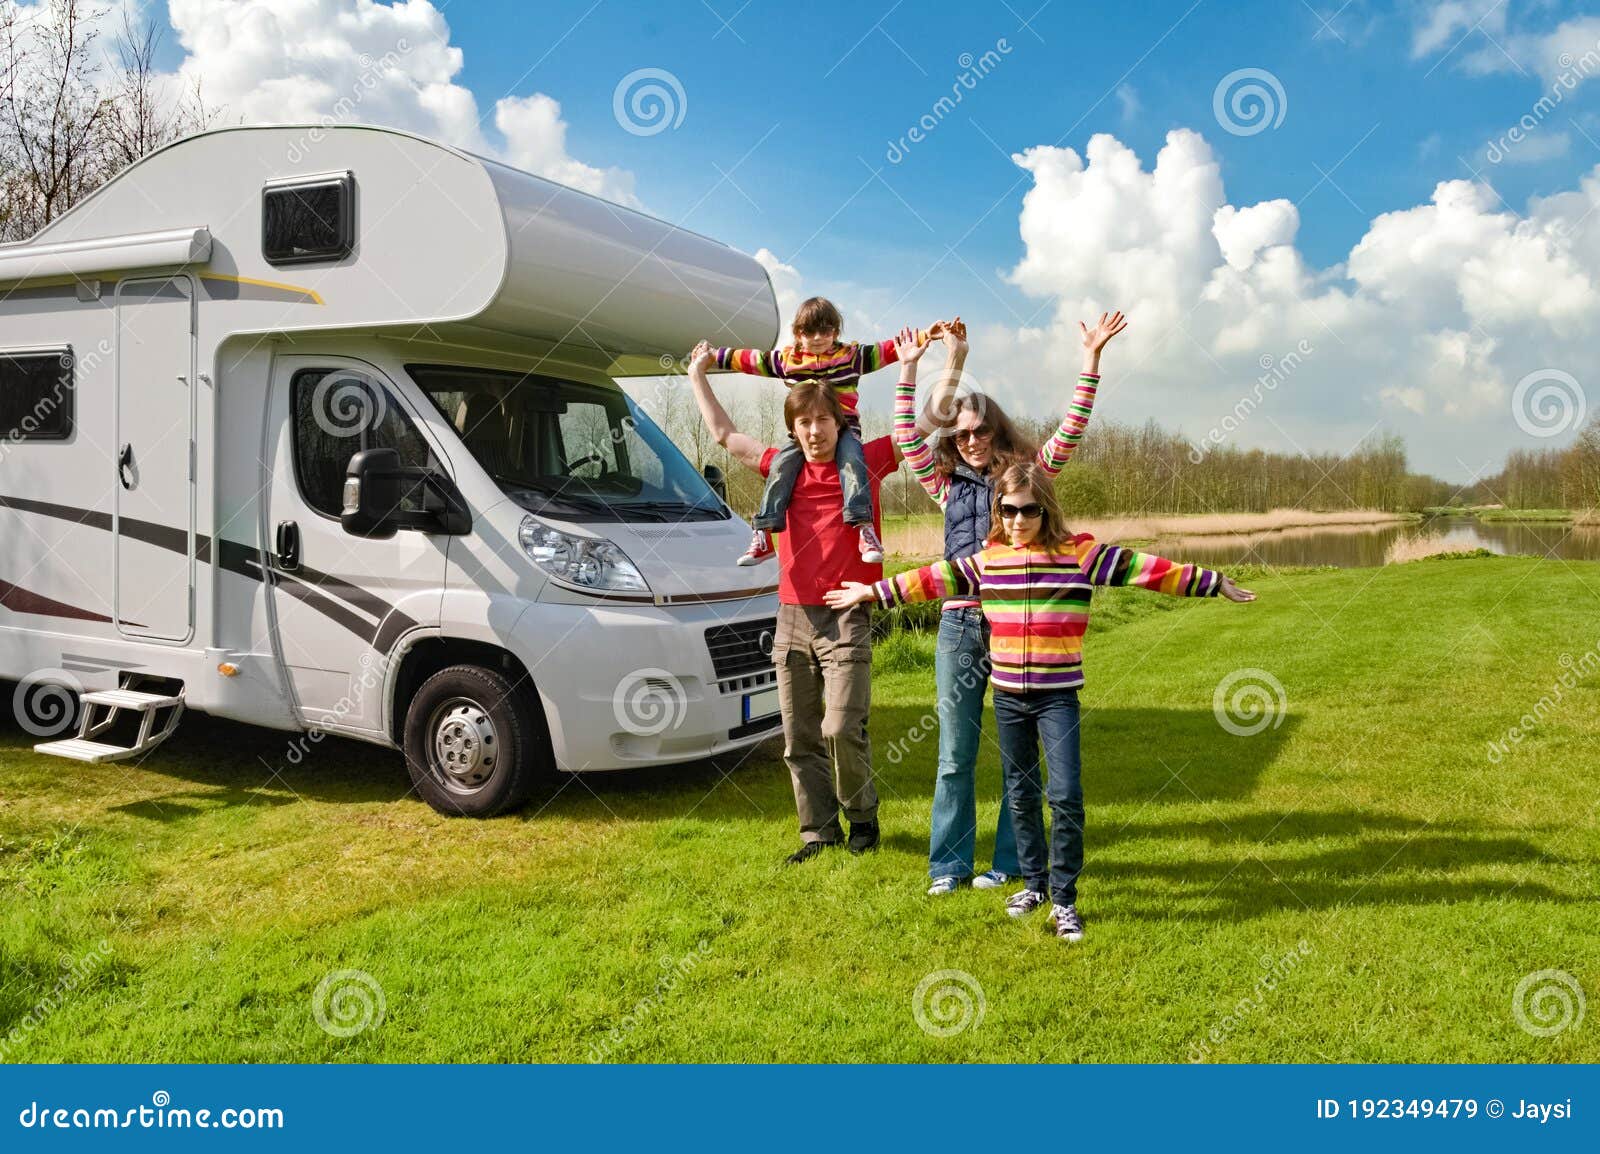 Family Vacation, RV Travel With Kids, Happy Parents With 